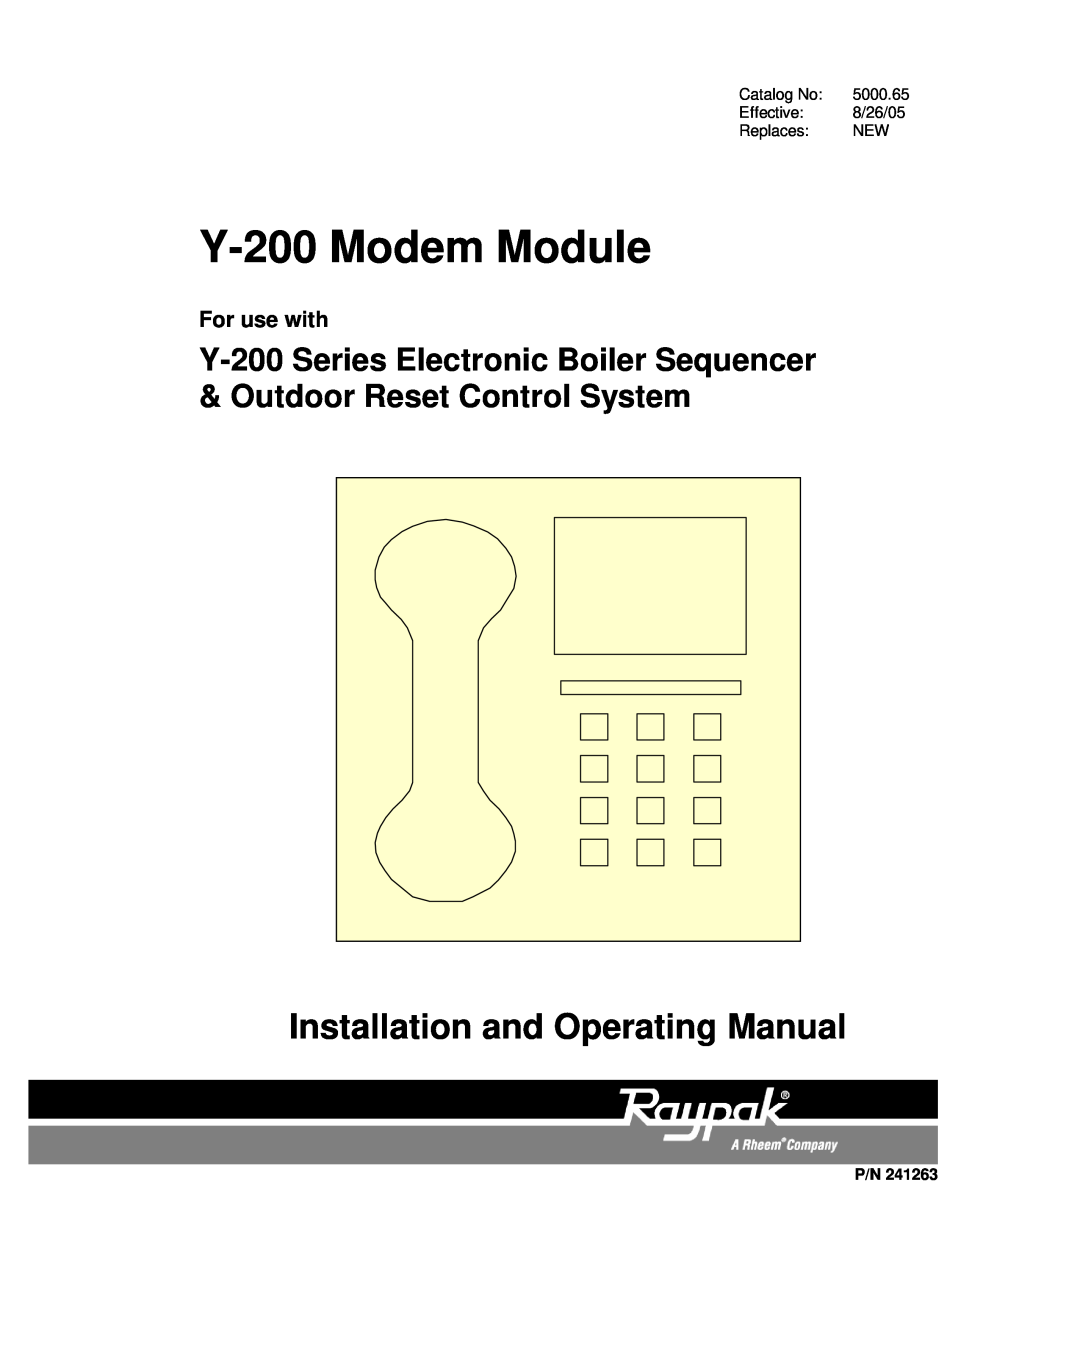 Raypak manual Y-200Modem Module, Installation and Operating Manual, For use with 